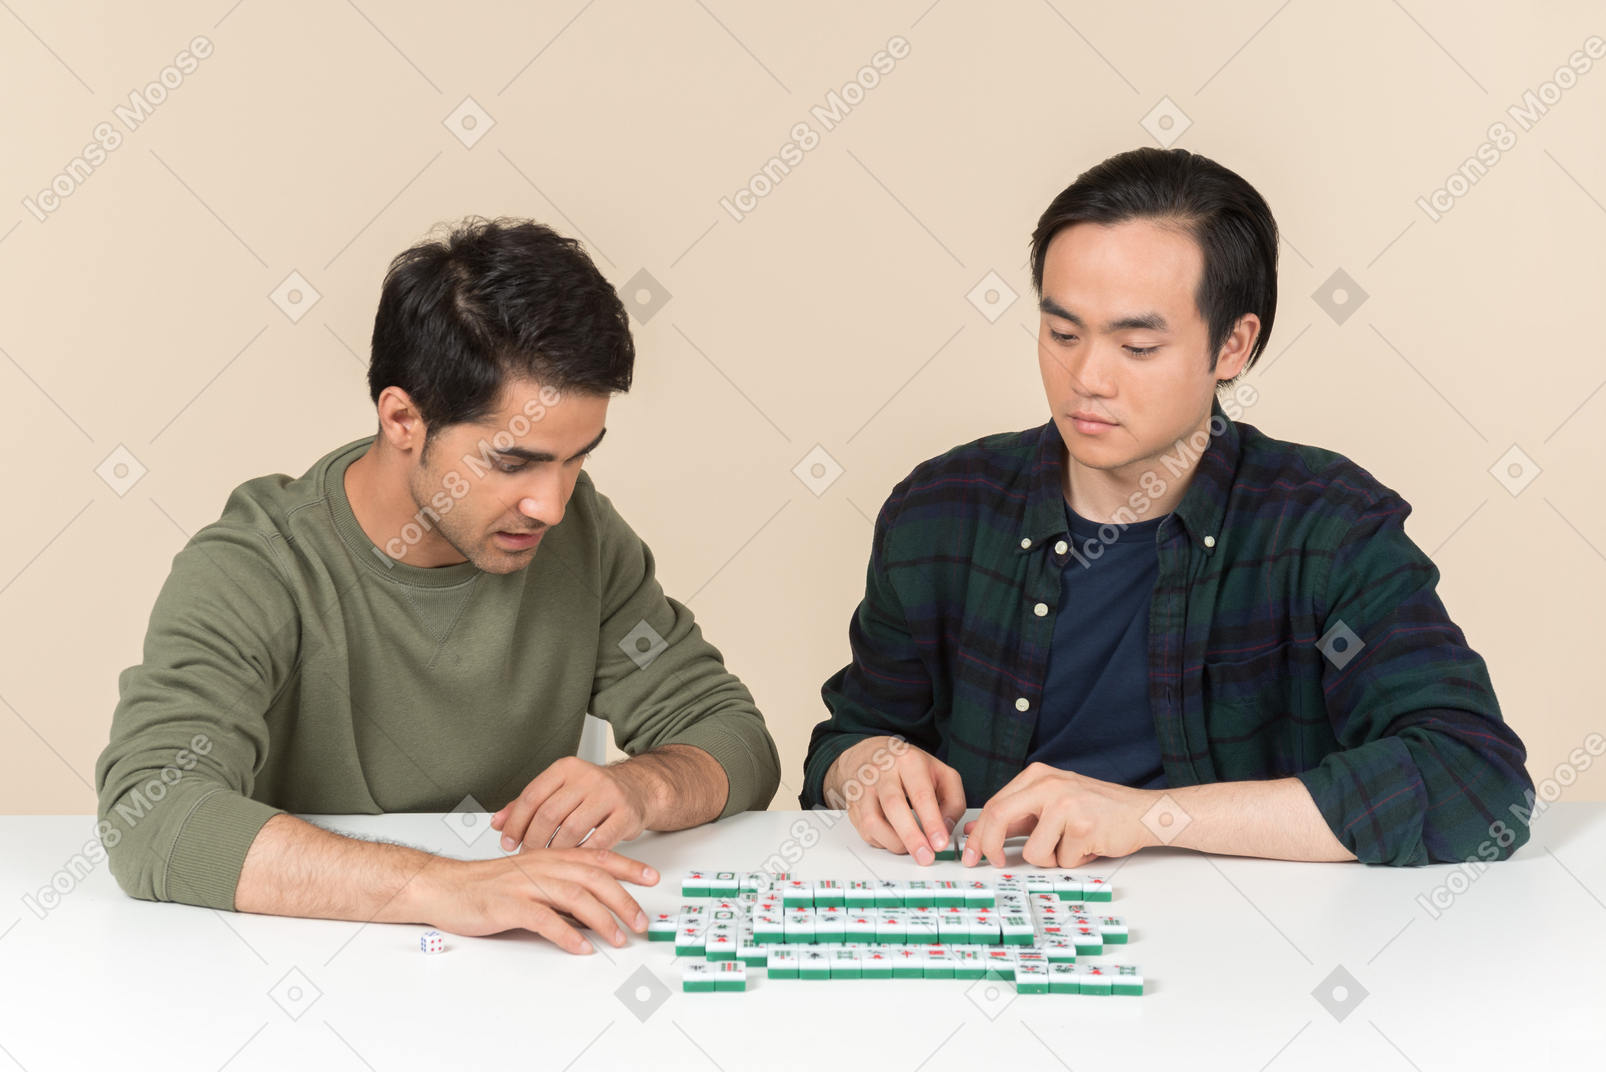 Young interracial friends sitting at the table and playing scramble game